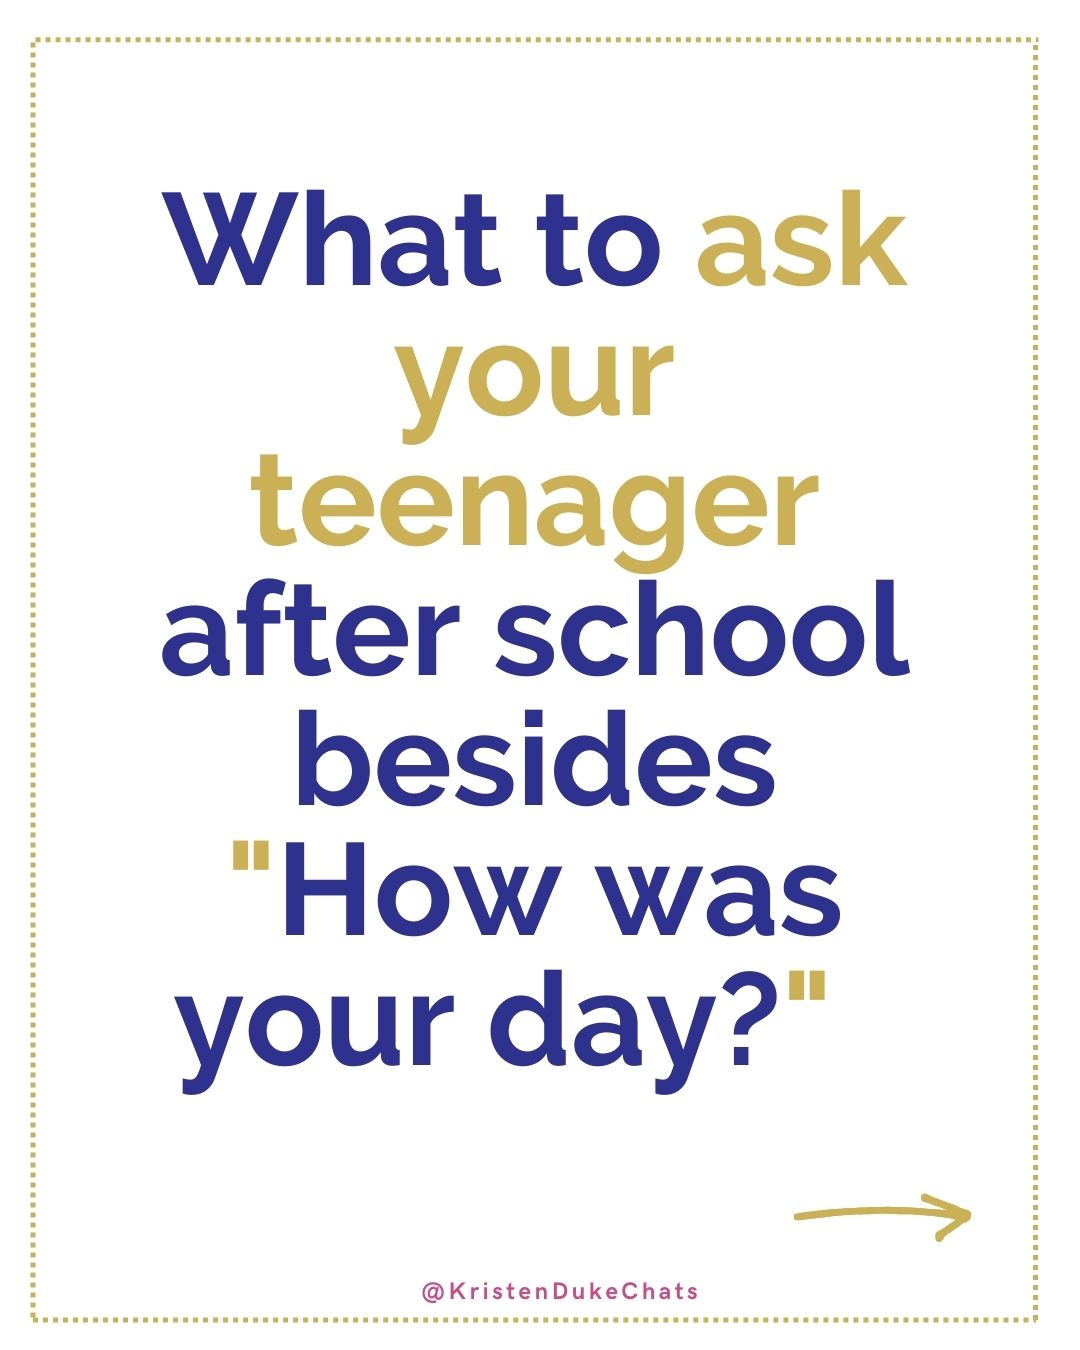 What to ask your teenager after school